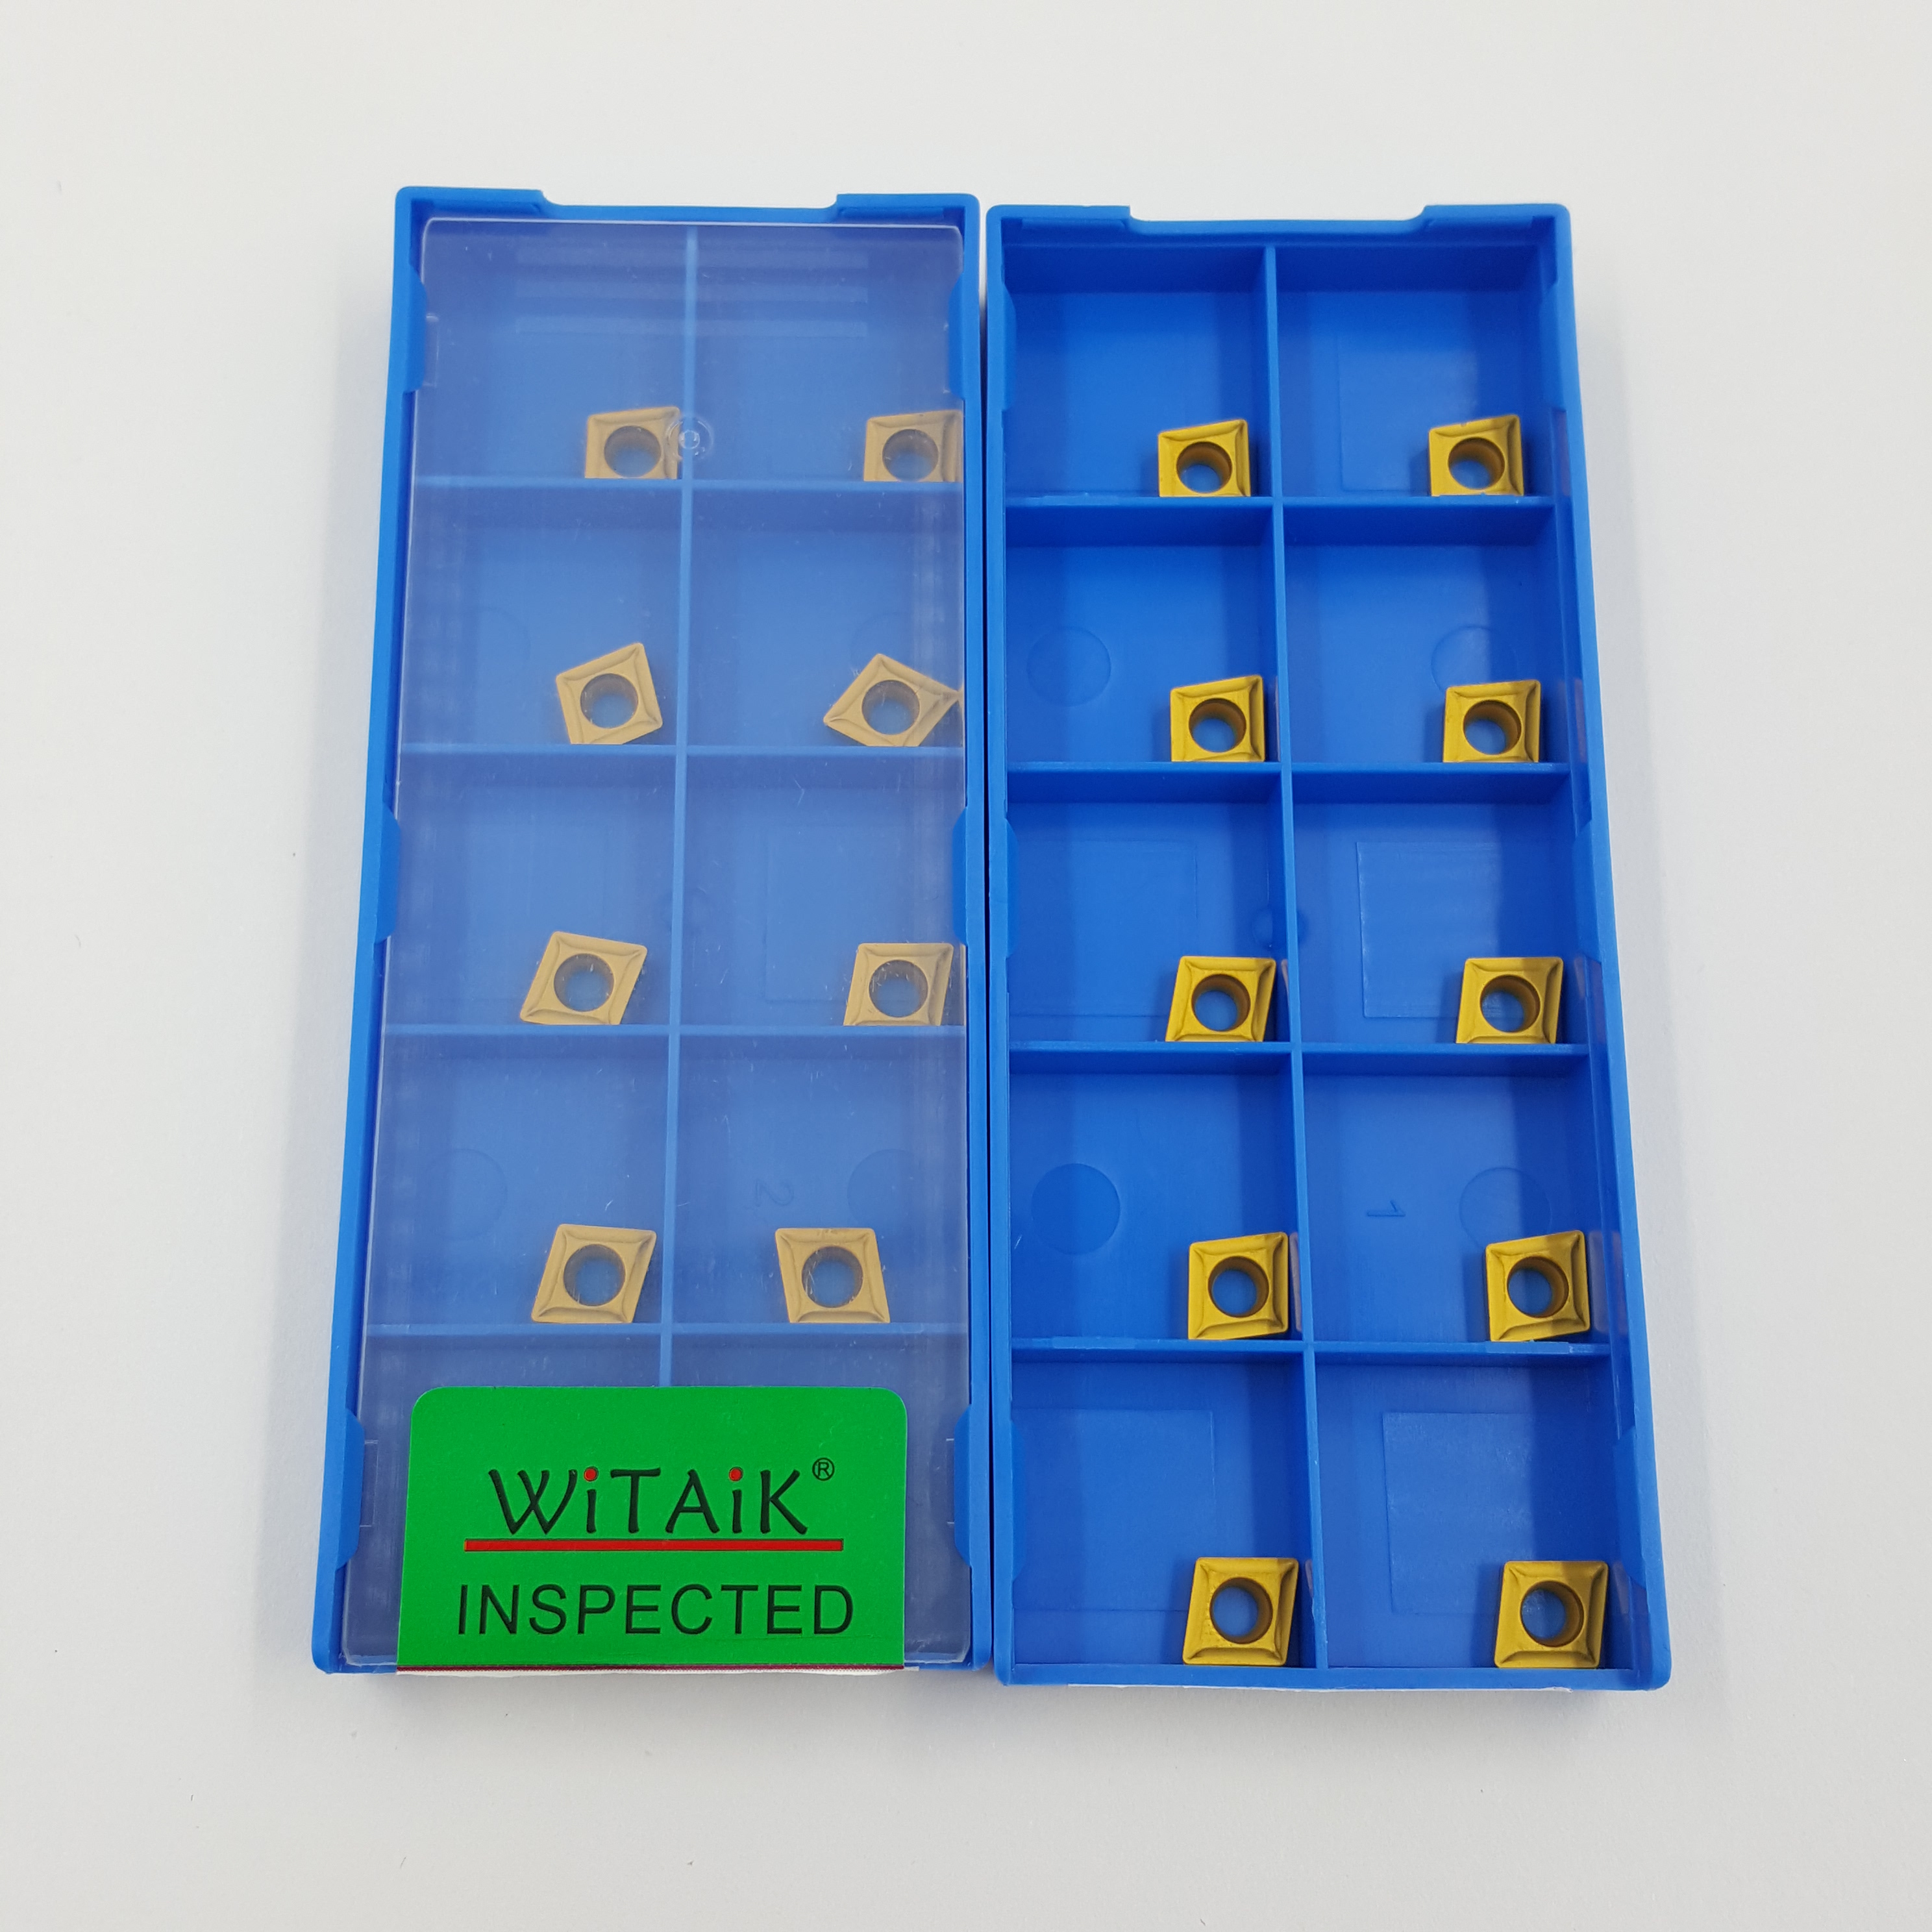  WITAIK high quality turning insert CCMT060204-53 WP6251 Suitable for semi-processing of steel parts